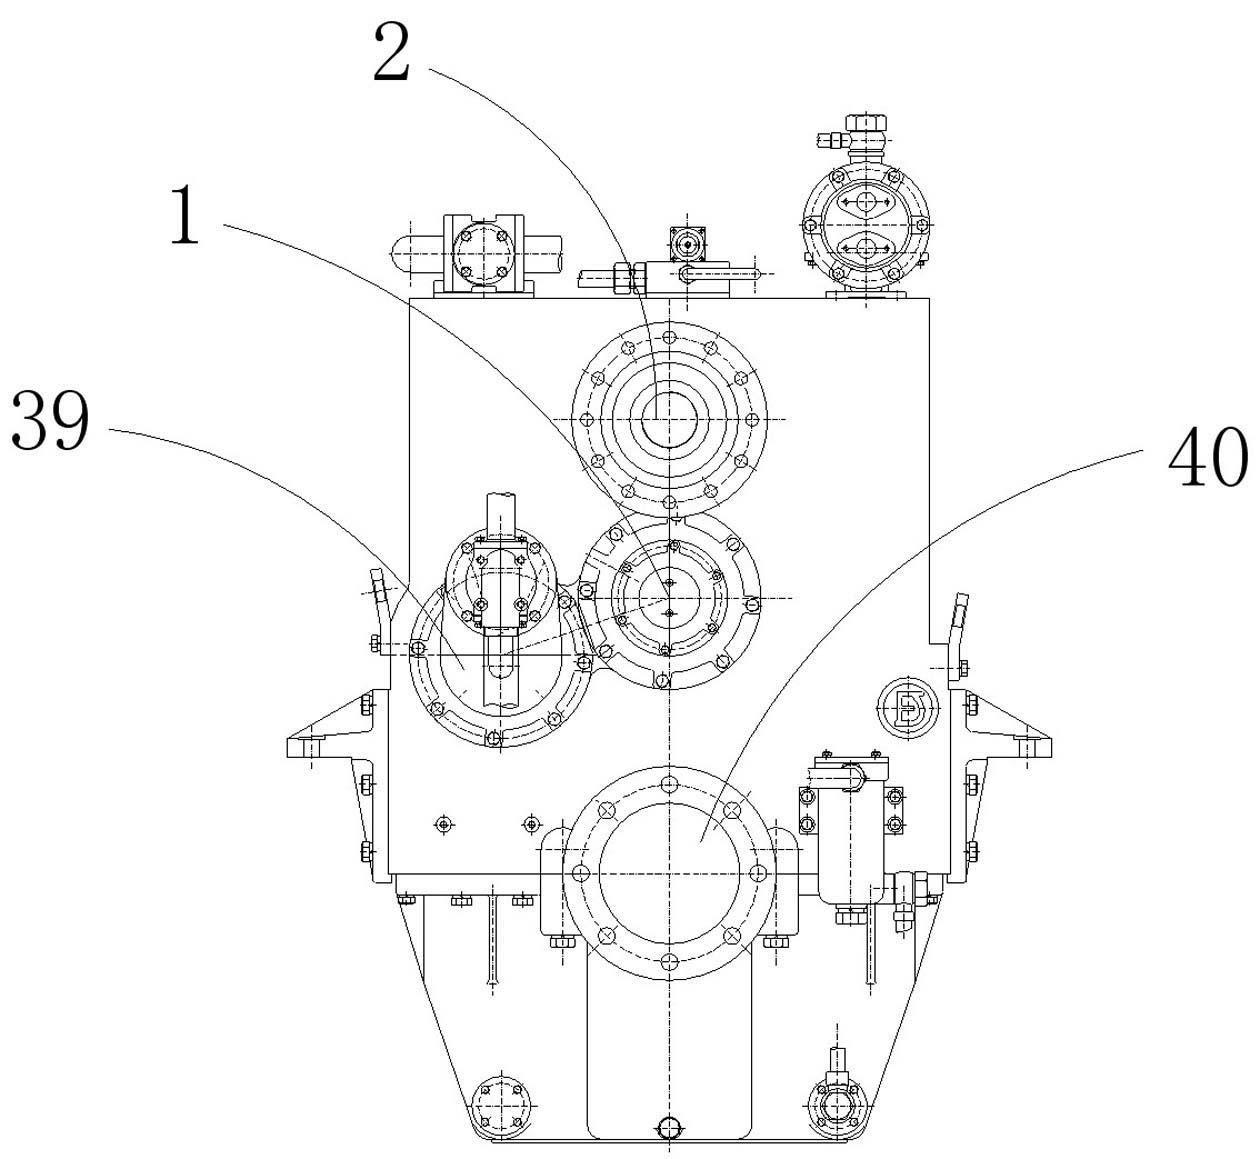 Gearbox with reversing, ahead running, clutching and full-power PTO (Power Take Off) output functions for ship